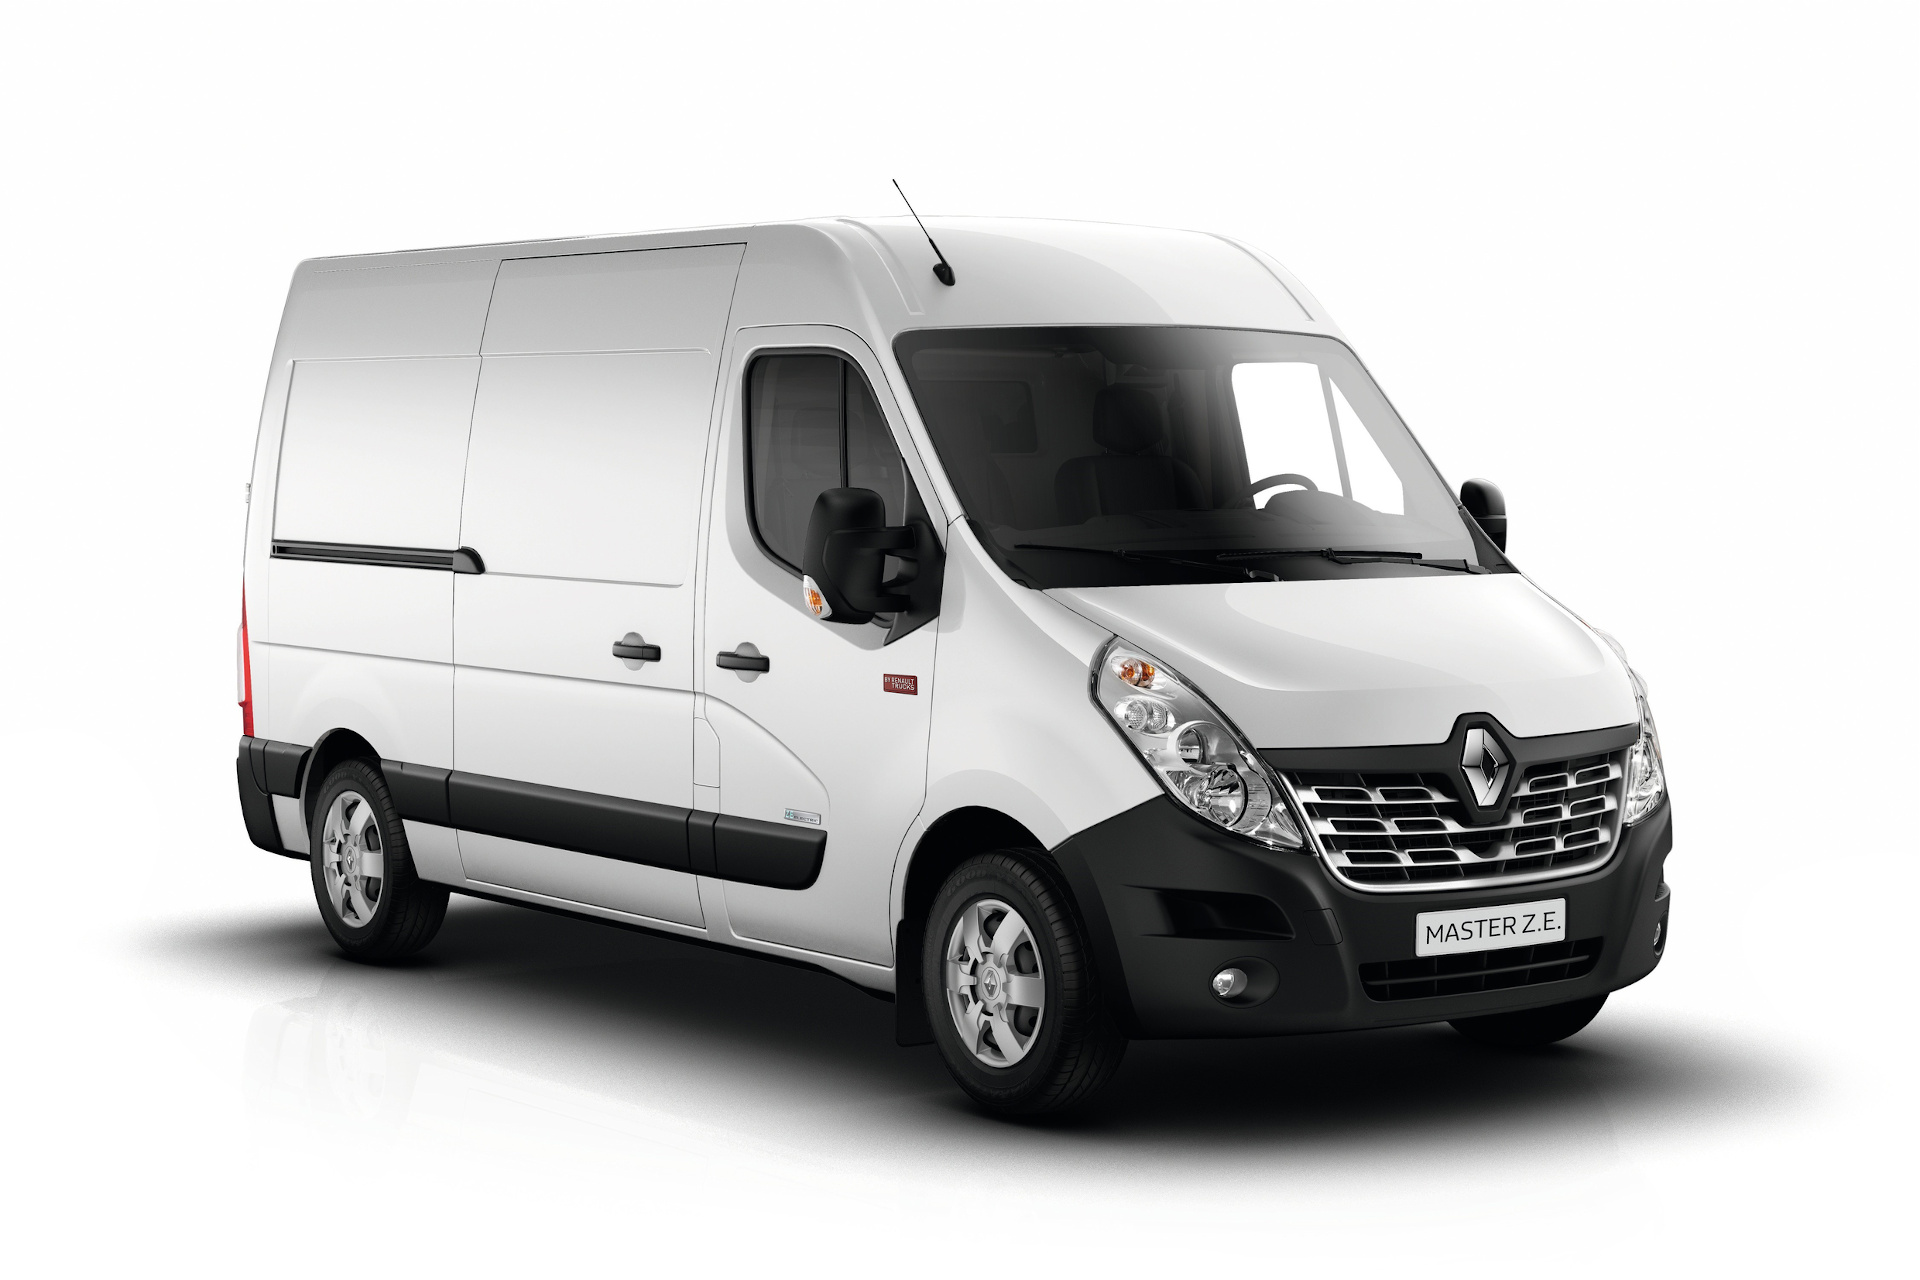 RENAULT TRUCKS IS LAUNCHING THE RENAULT MASTER Z.E., ITS ALL ELECTRIC  UTILITY VEHICLE